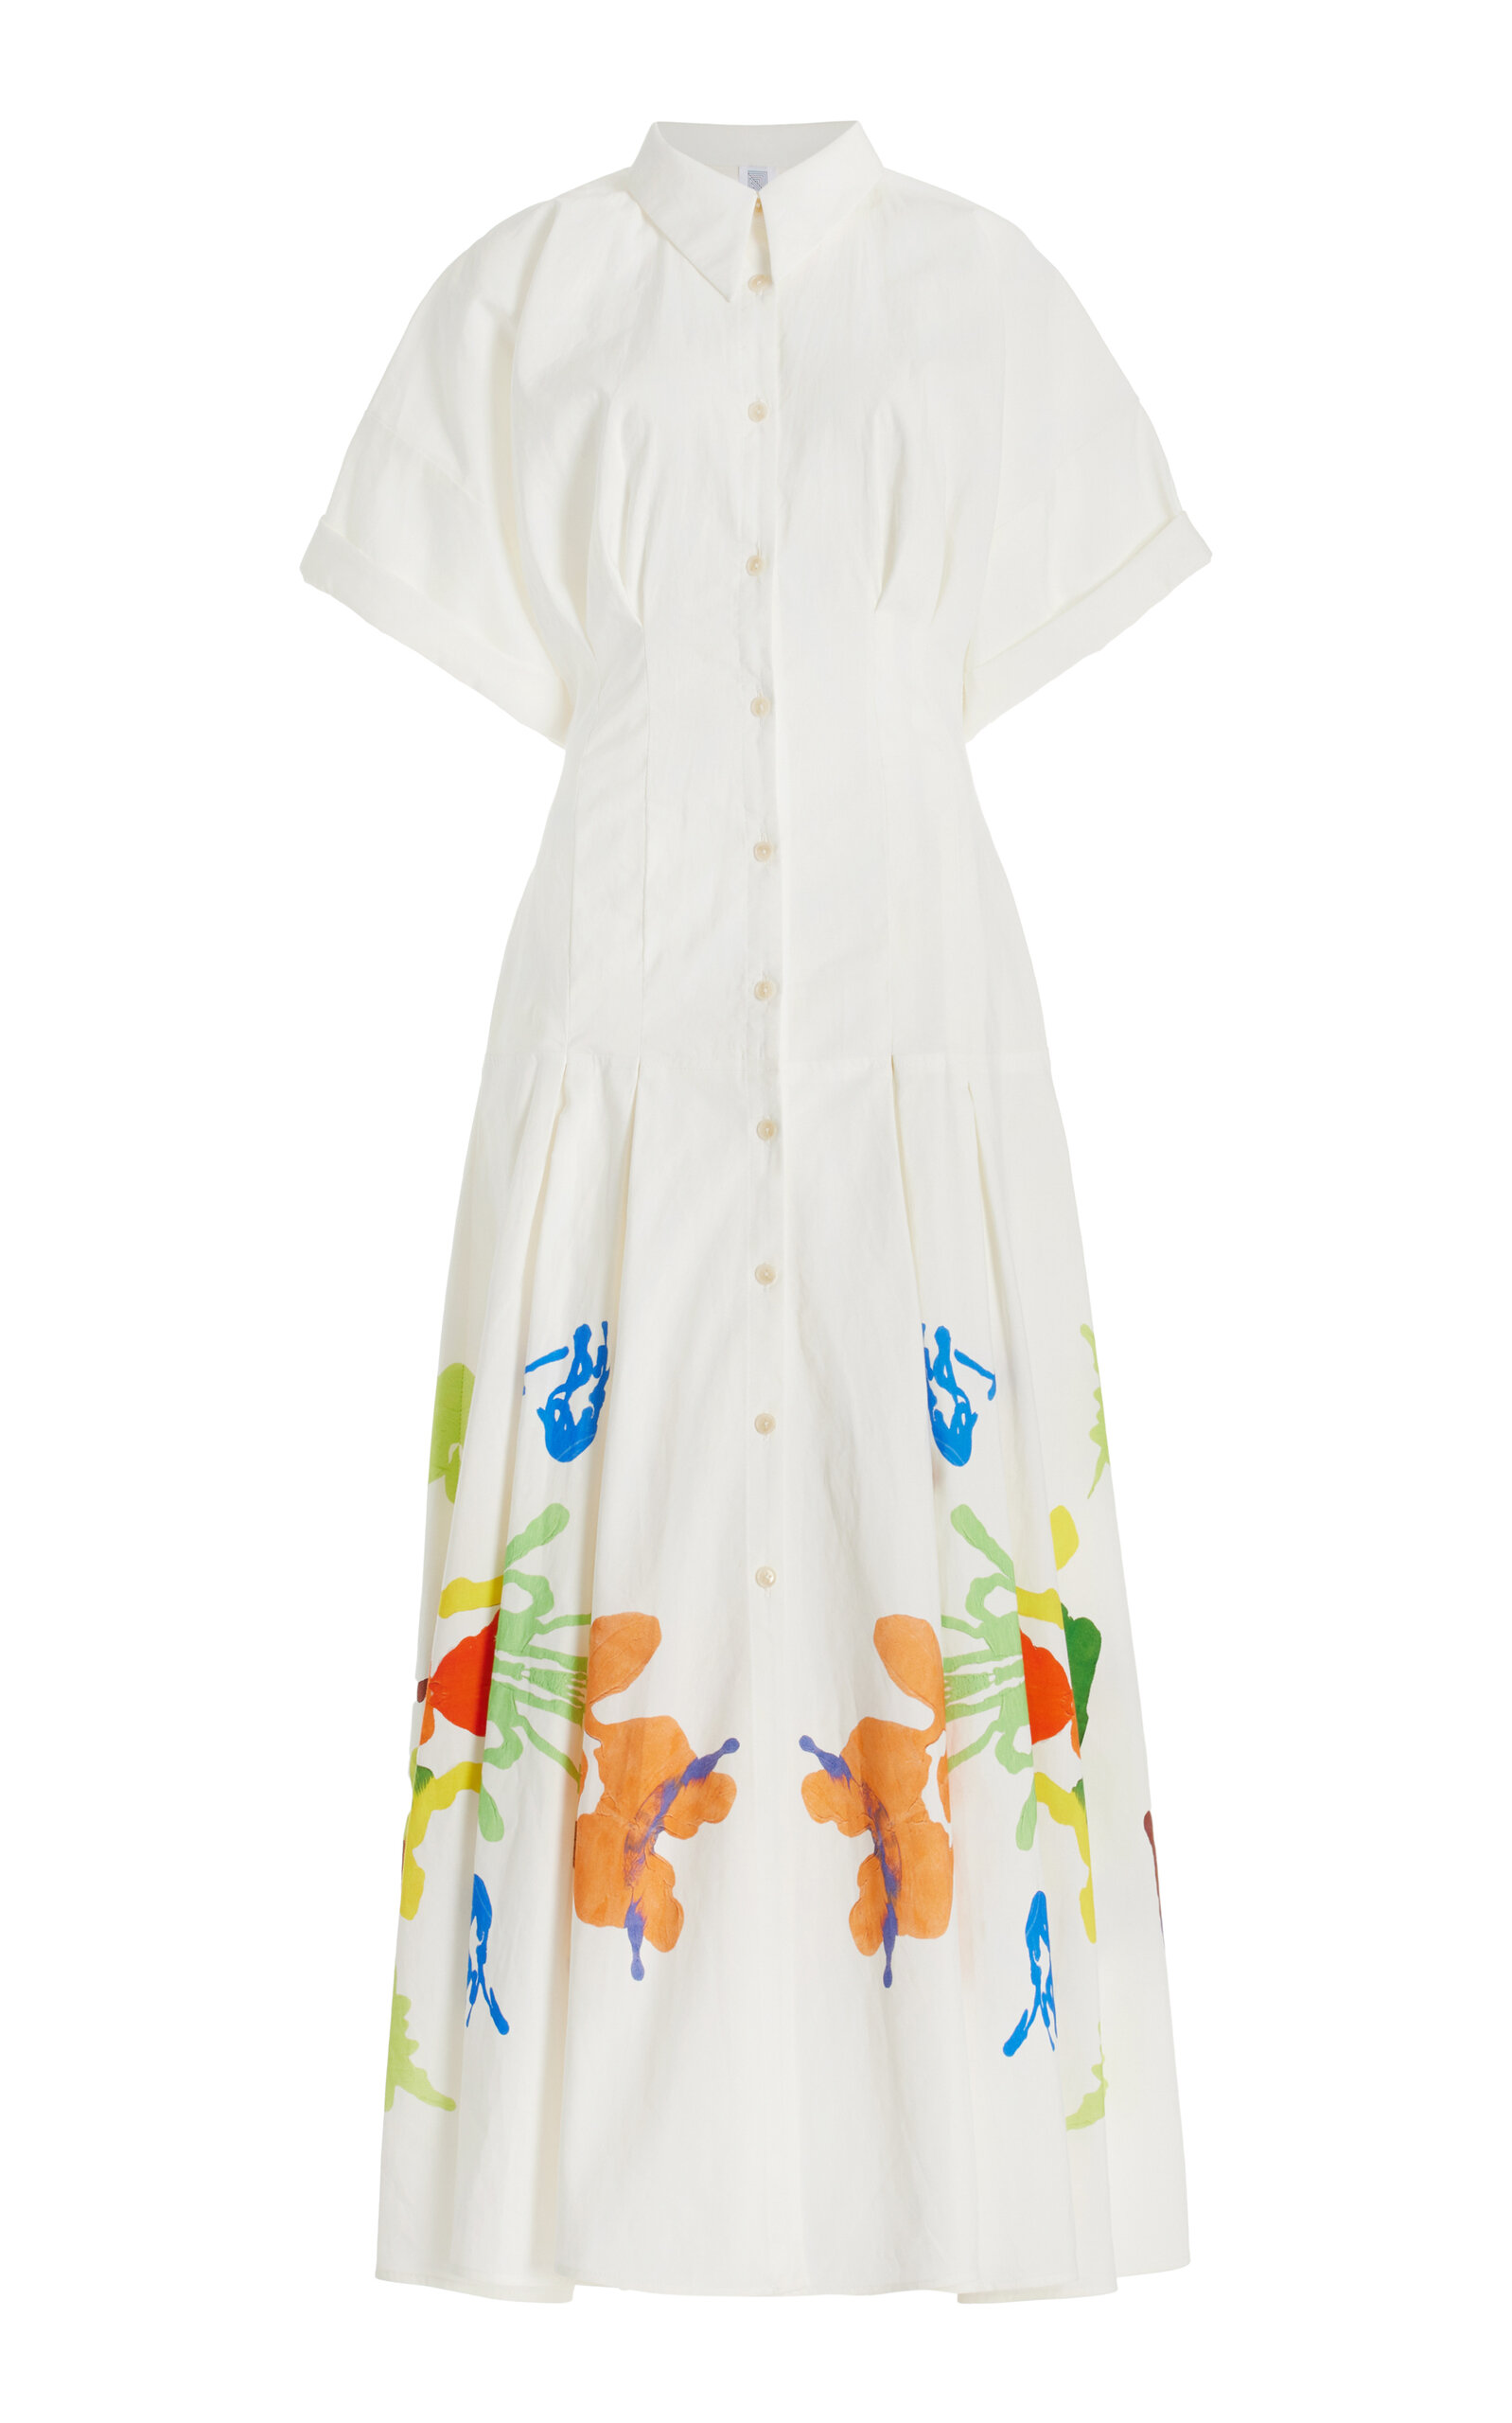 Rosie Assoulin Women's Jolly 'oliday Printed Cotton-linen Shirt Dress In White